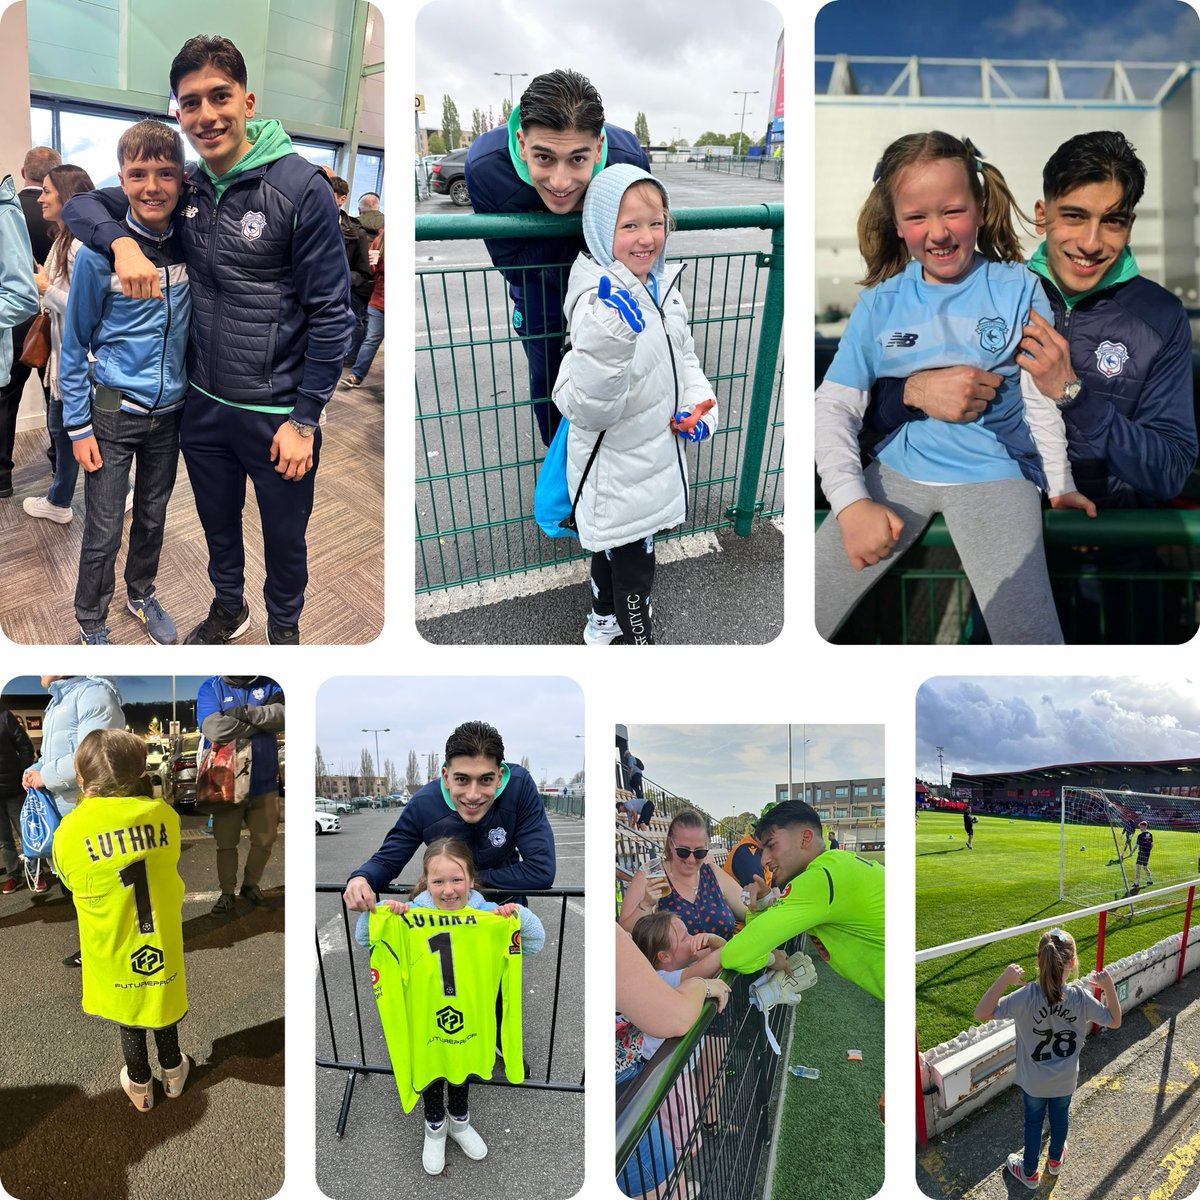 Happy birthday to @CardiffCityFC stopper Rohan Luthra!

22 today!

Always top class with fans, always has time to stop and talk all things football!

Busy year, trips with @sloughtownfc from Arbour park to ebbsfleet (A) on sienna’s birthday!

Enjoy the day Rohan!